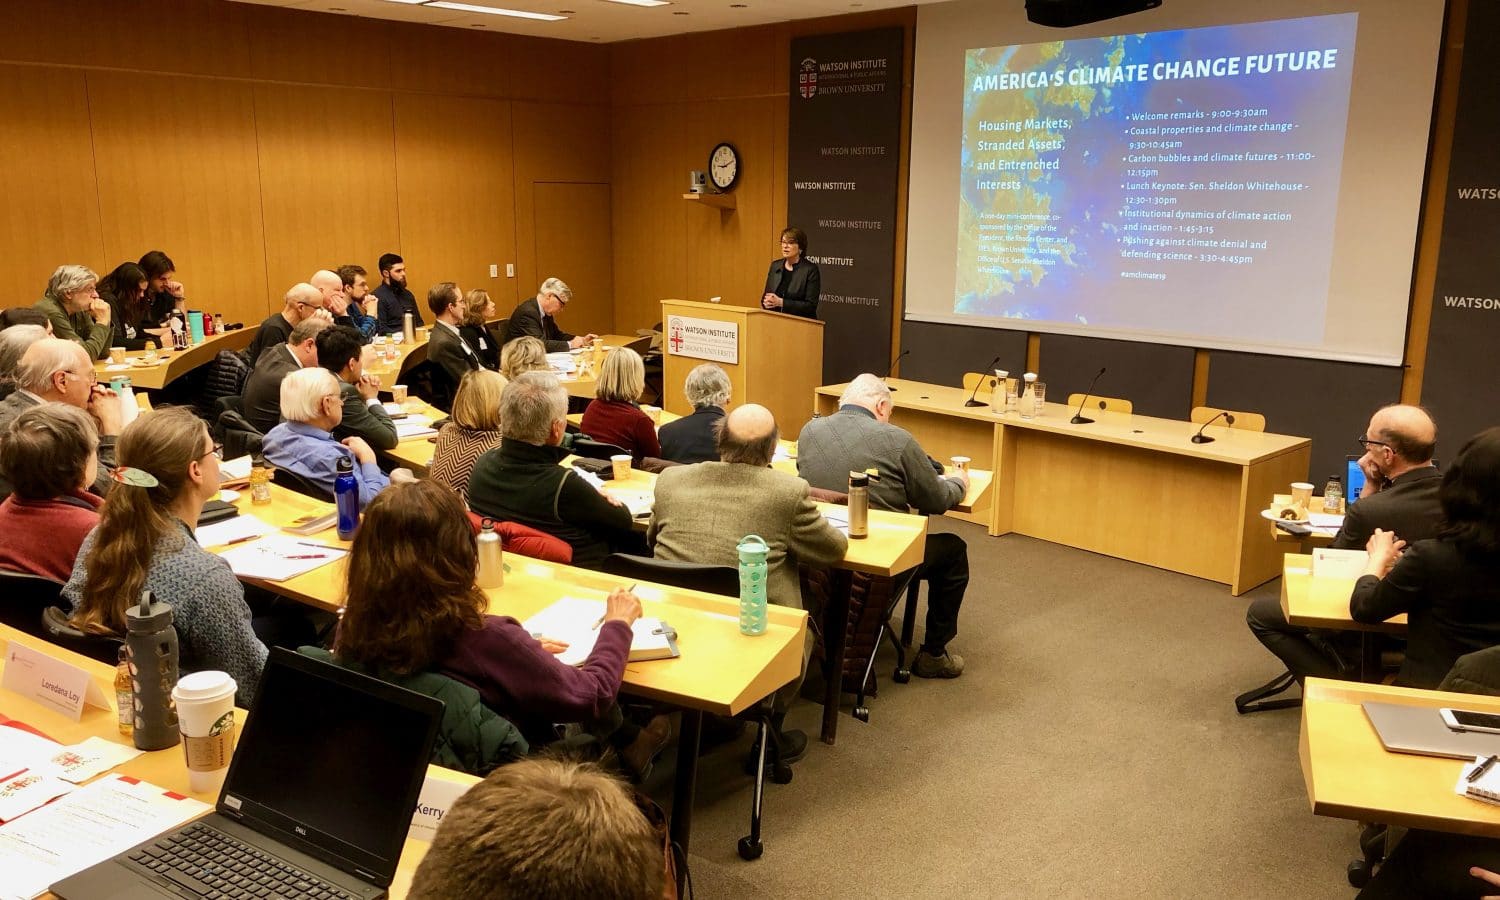 Rhode Island News: Sheldon Whitehouse featured at America’s Climate Change Future mini conference at Brown University